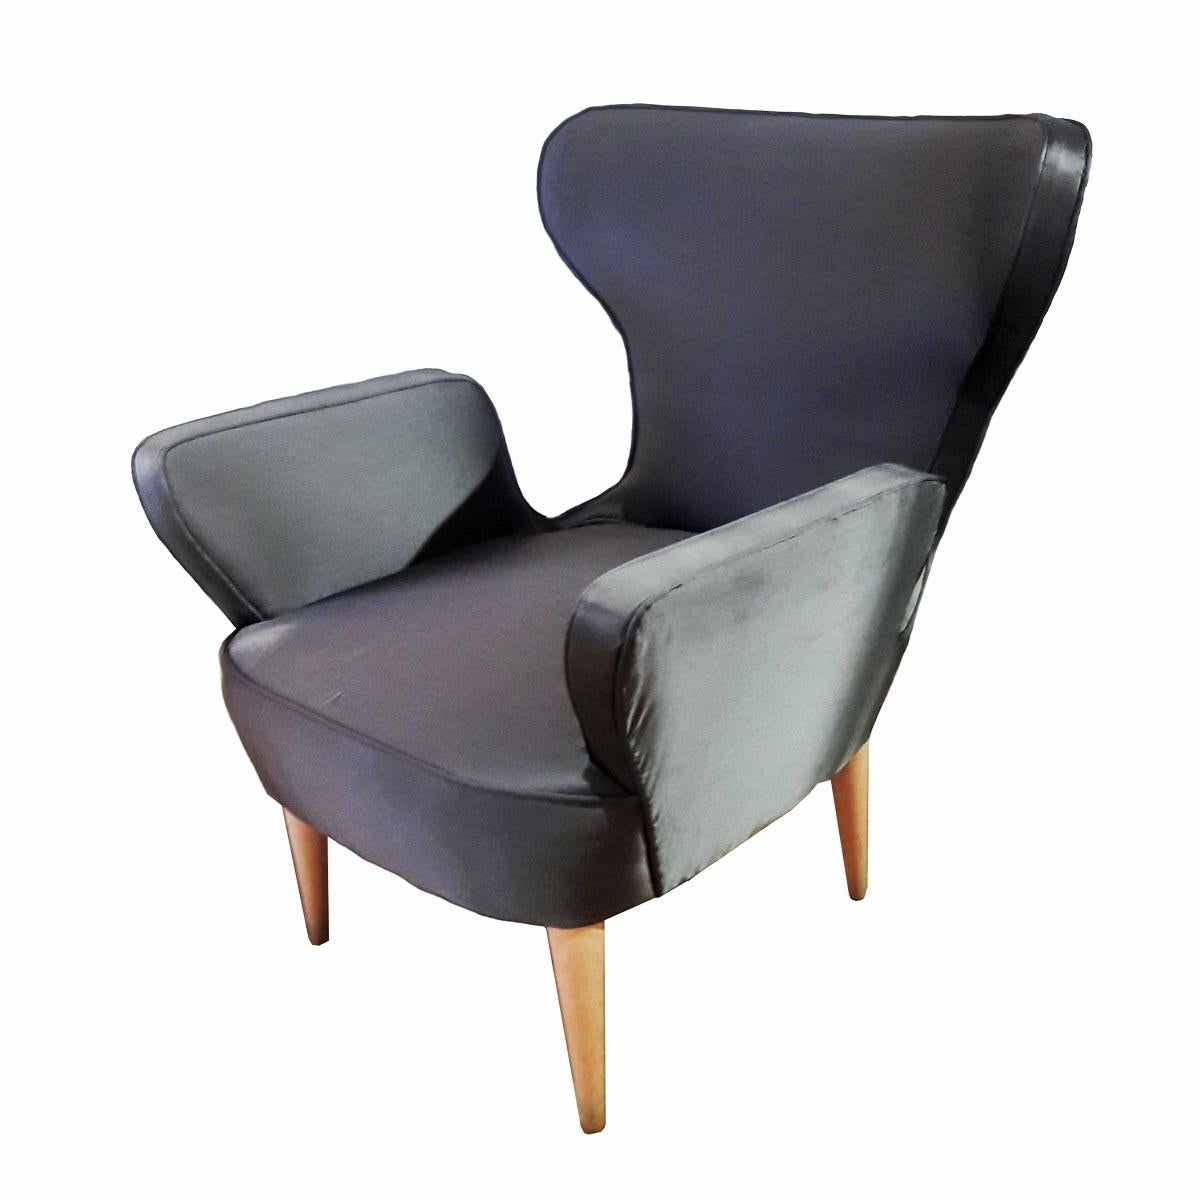 A Tulip-style chair, from Turkey. Slate gray silk upholstery, blonde wood tapered legs. Ideal size for an accent chair in small spaces.